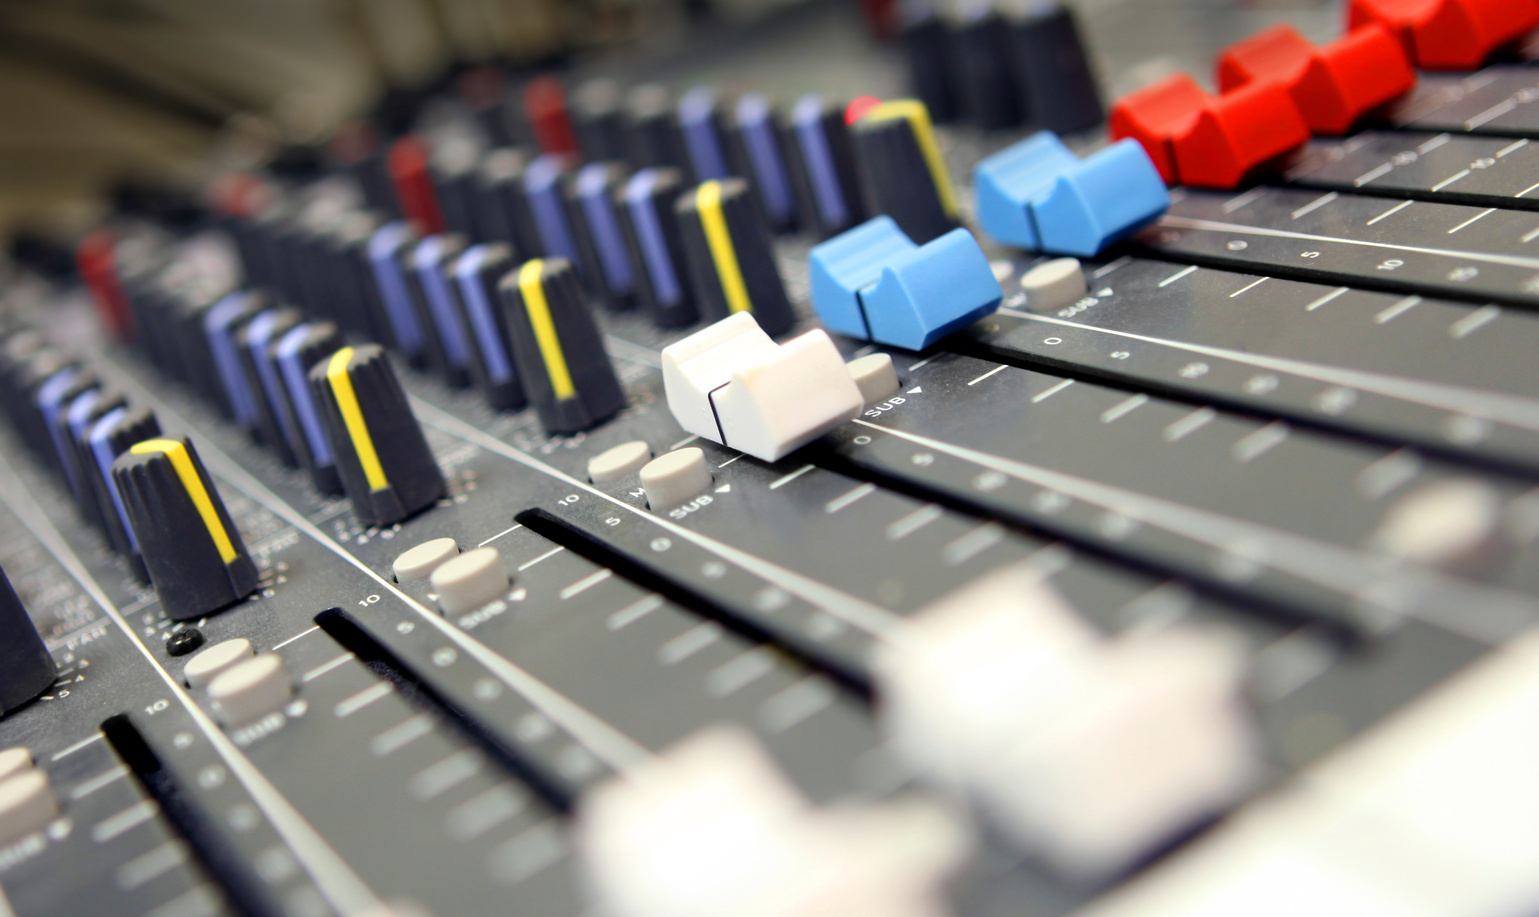 visual and audio mixers for montage and production